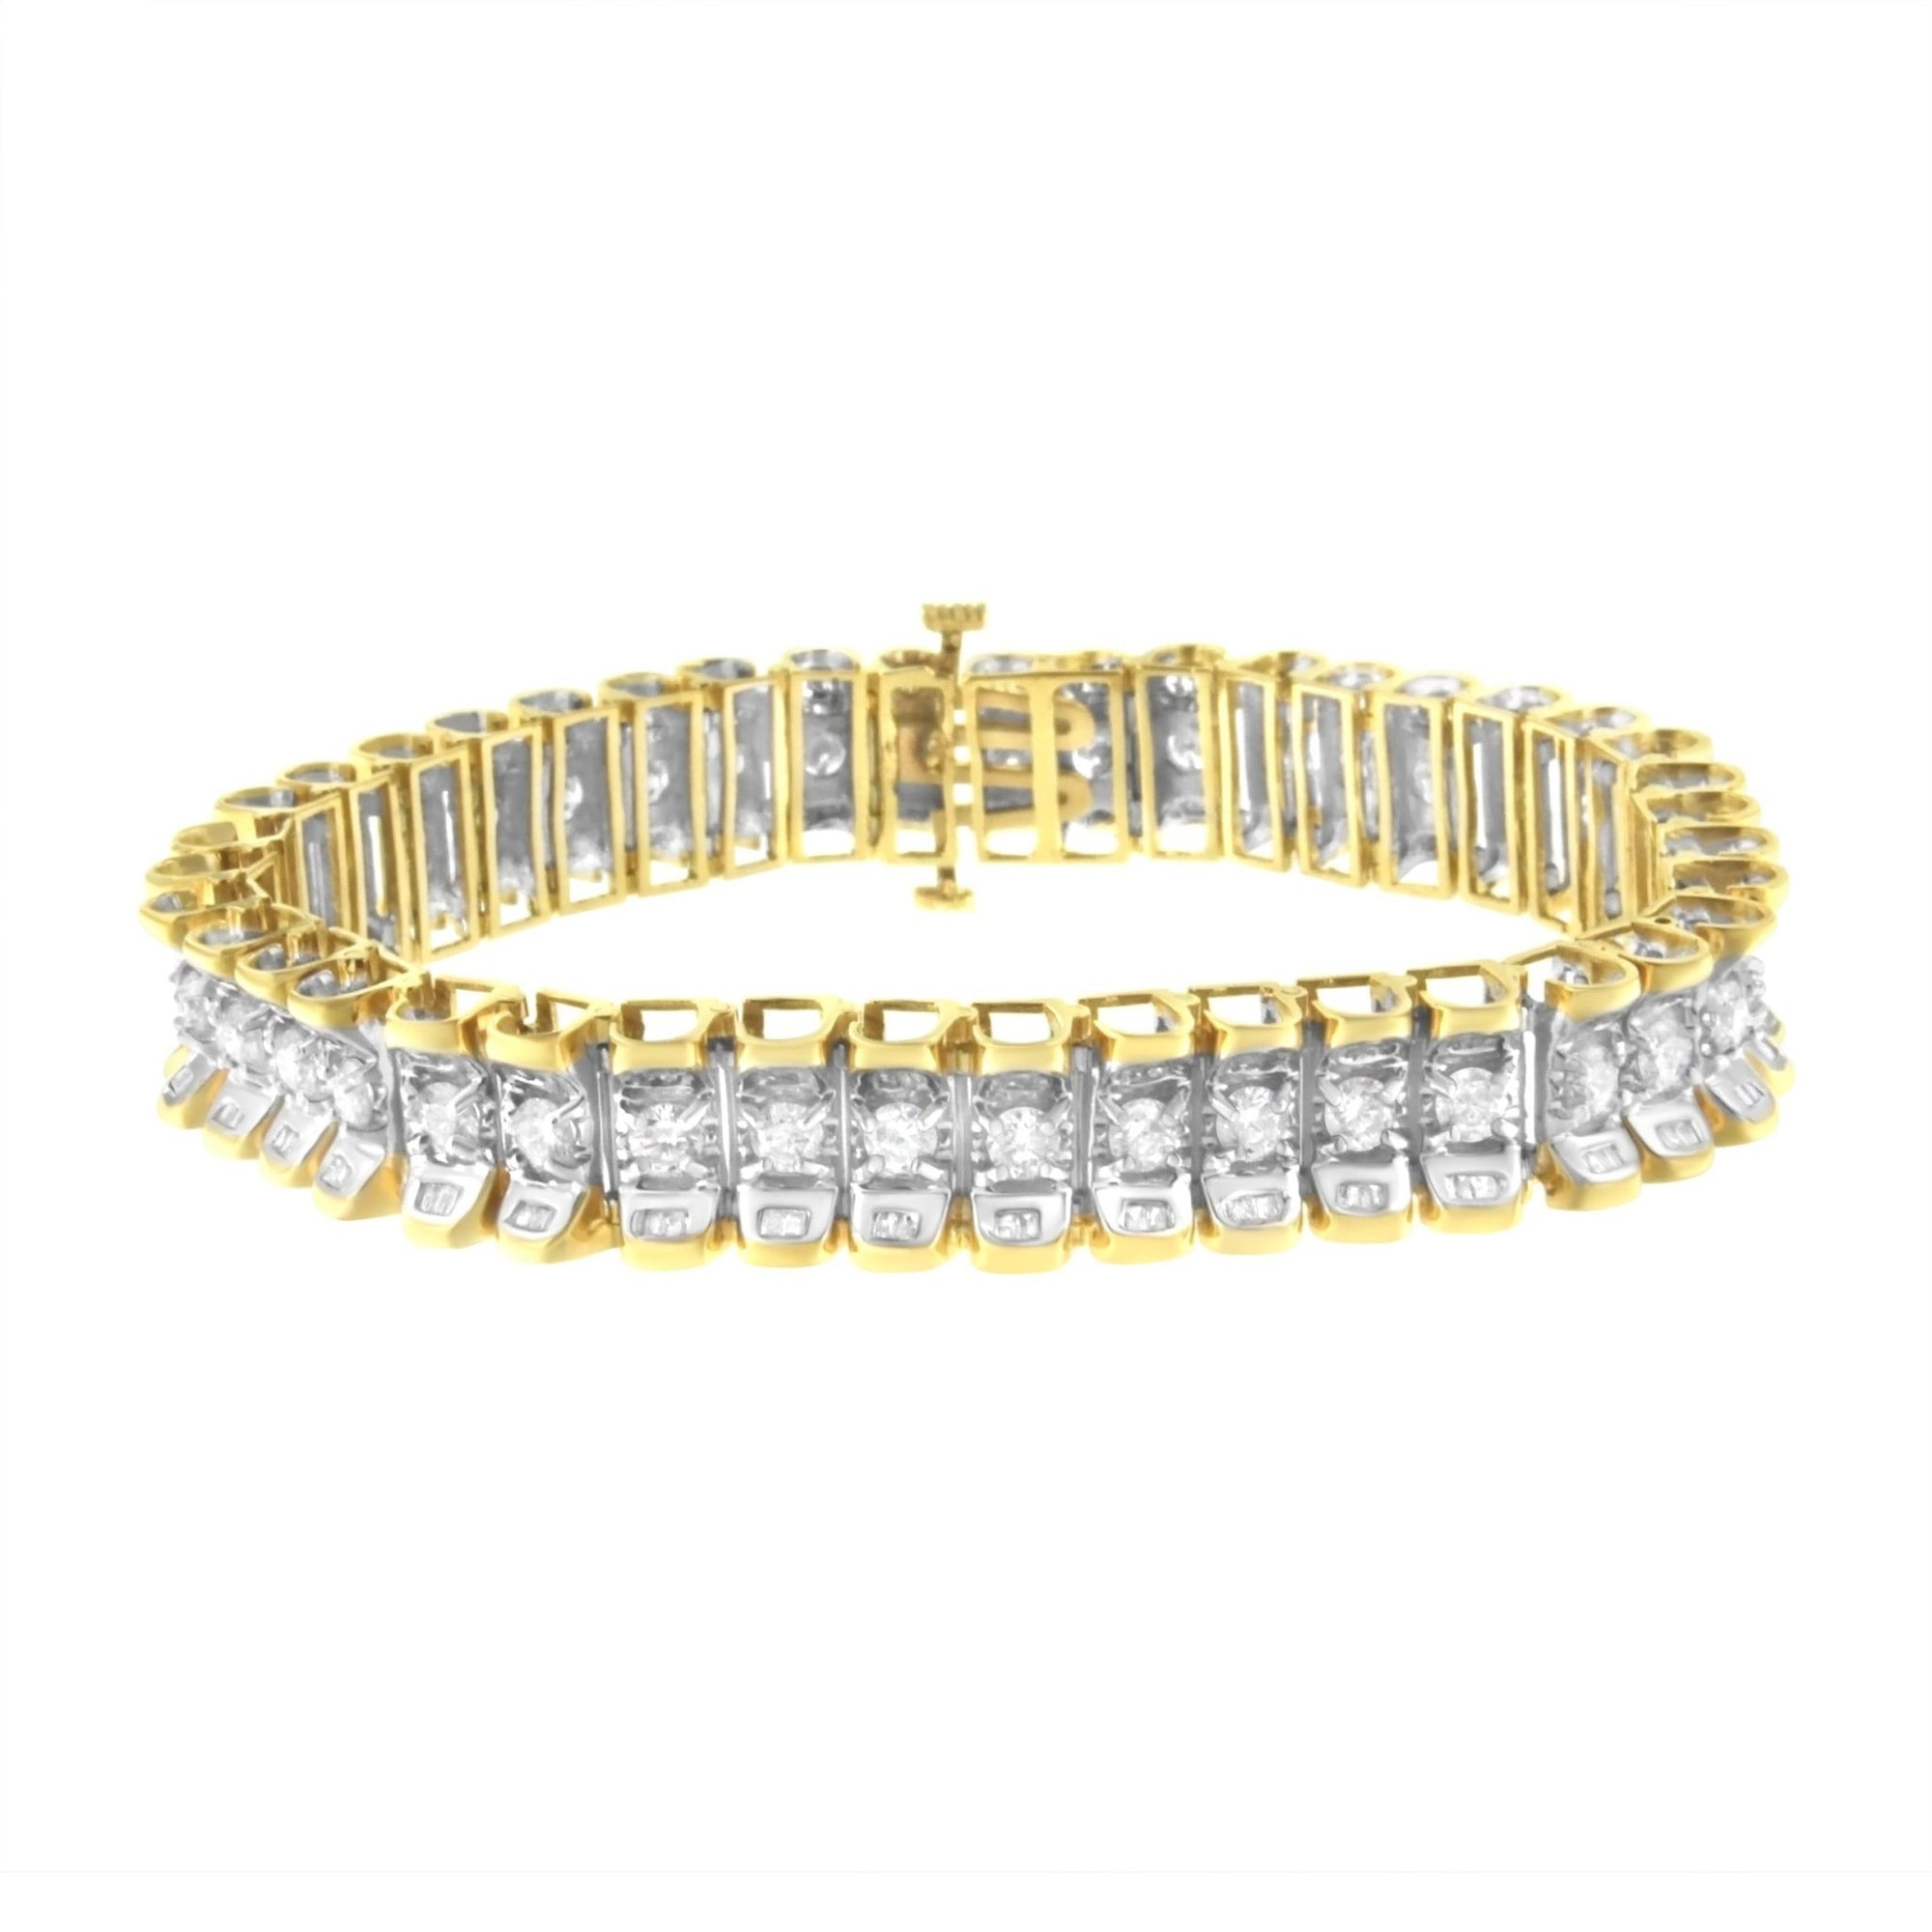 14K Yellow and White Gold 5.0 Cttw Round & Baguette Cut Diamond 7" Reflective Tennis Bracelet (H-I Color, I1-I2 Clarity) - LinkagejewelrydesignLinkagejewelrydesign